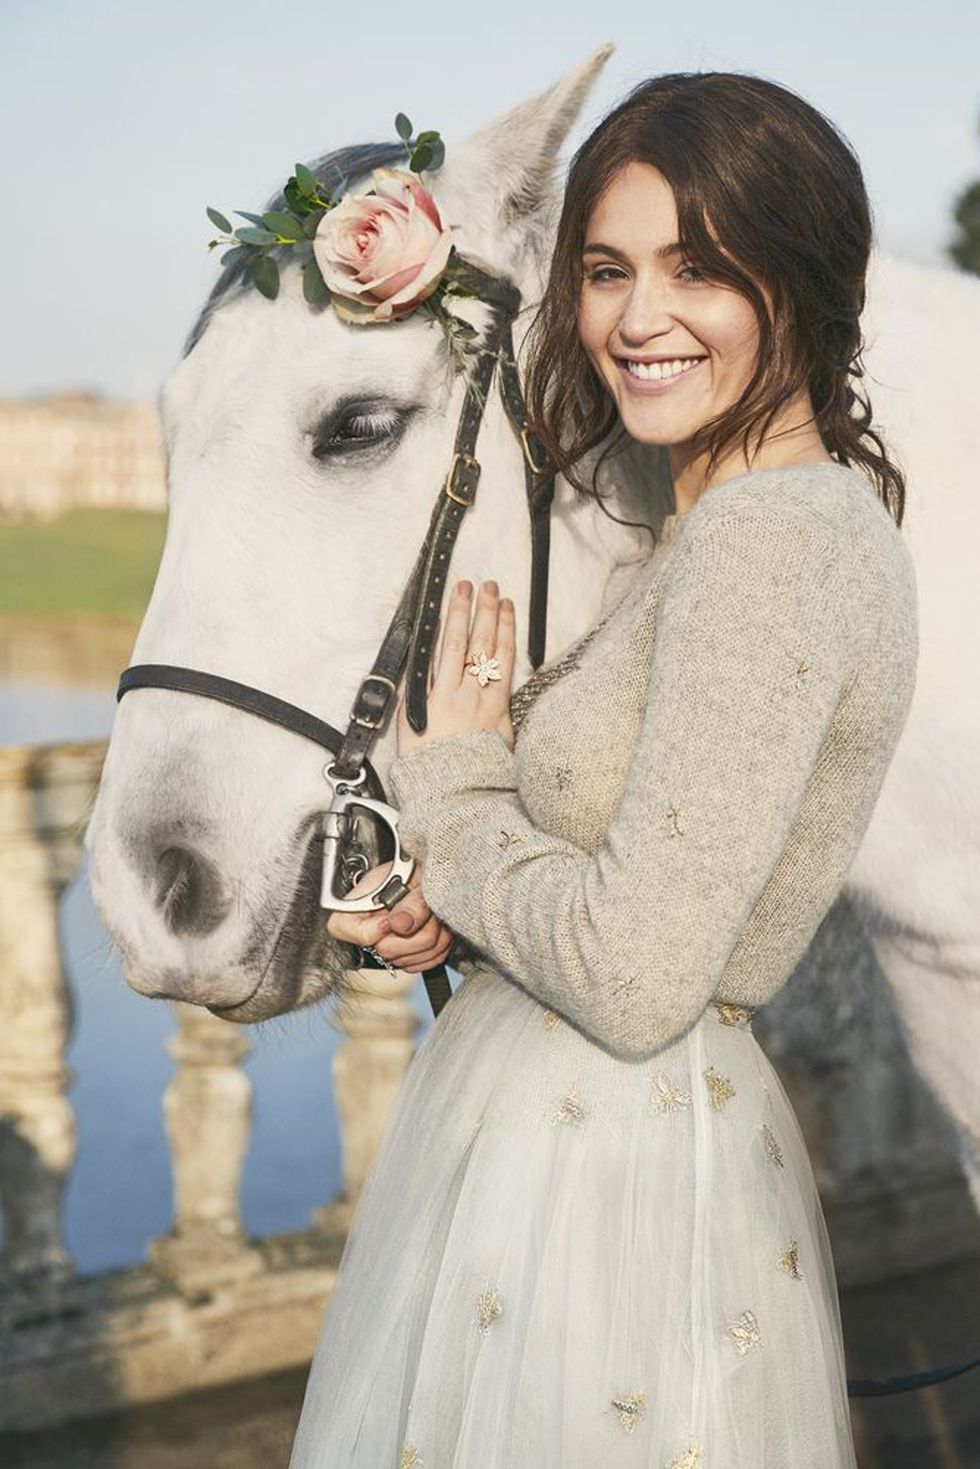 Gemma and horse